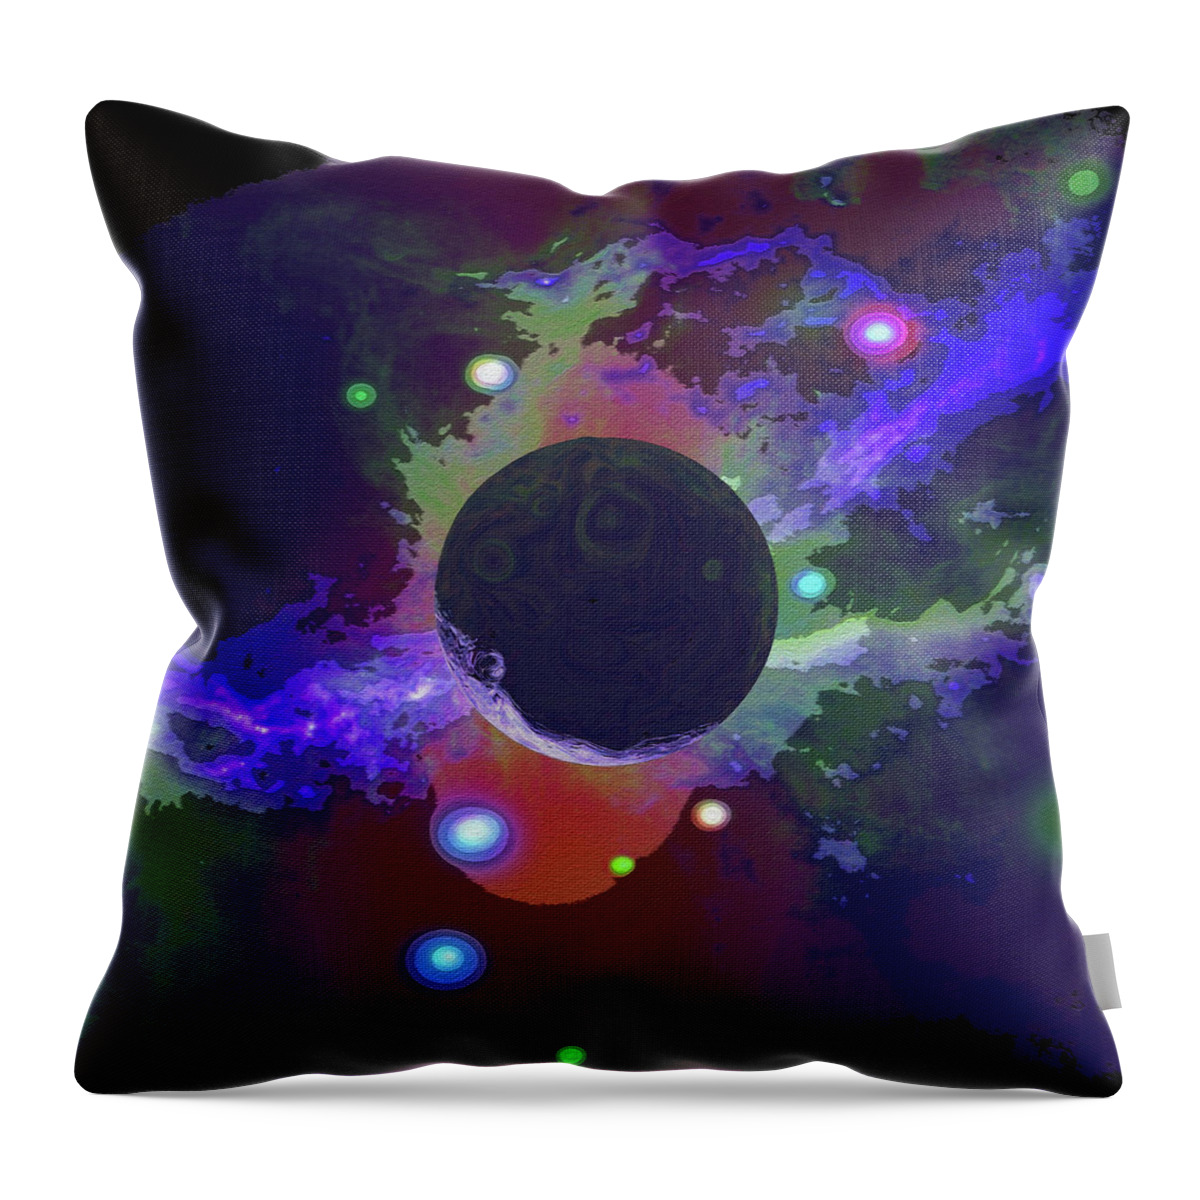 Abstract Throw Pillow featuring the digital art Mysterious Planet X by Don White Artdreamer